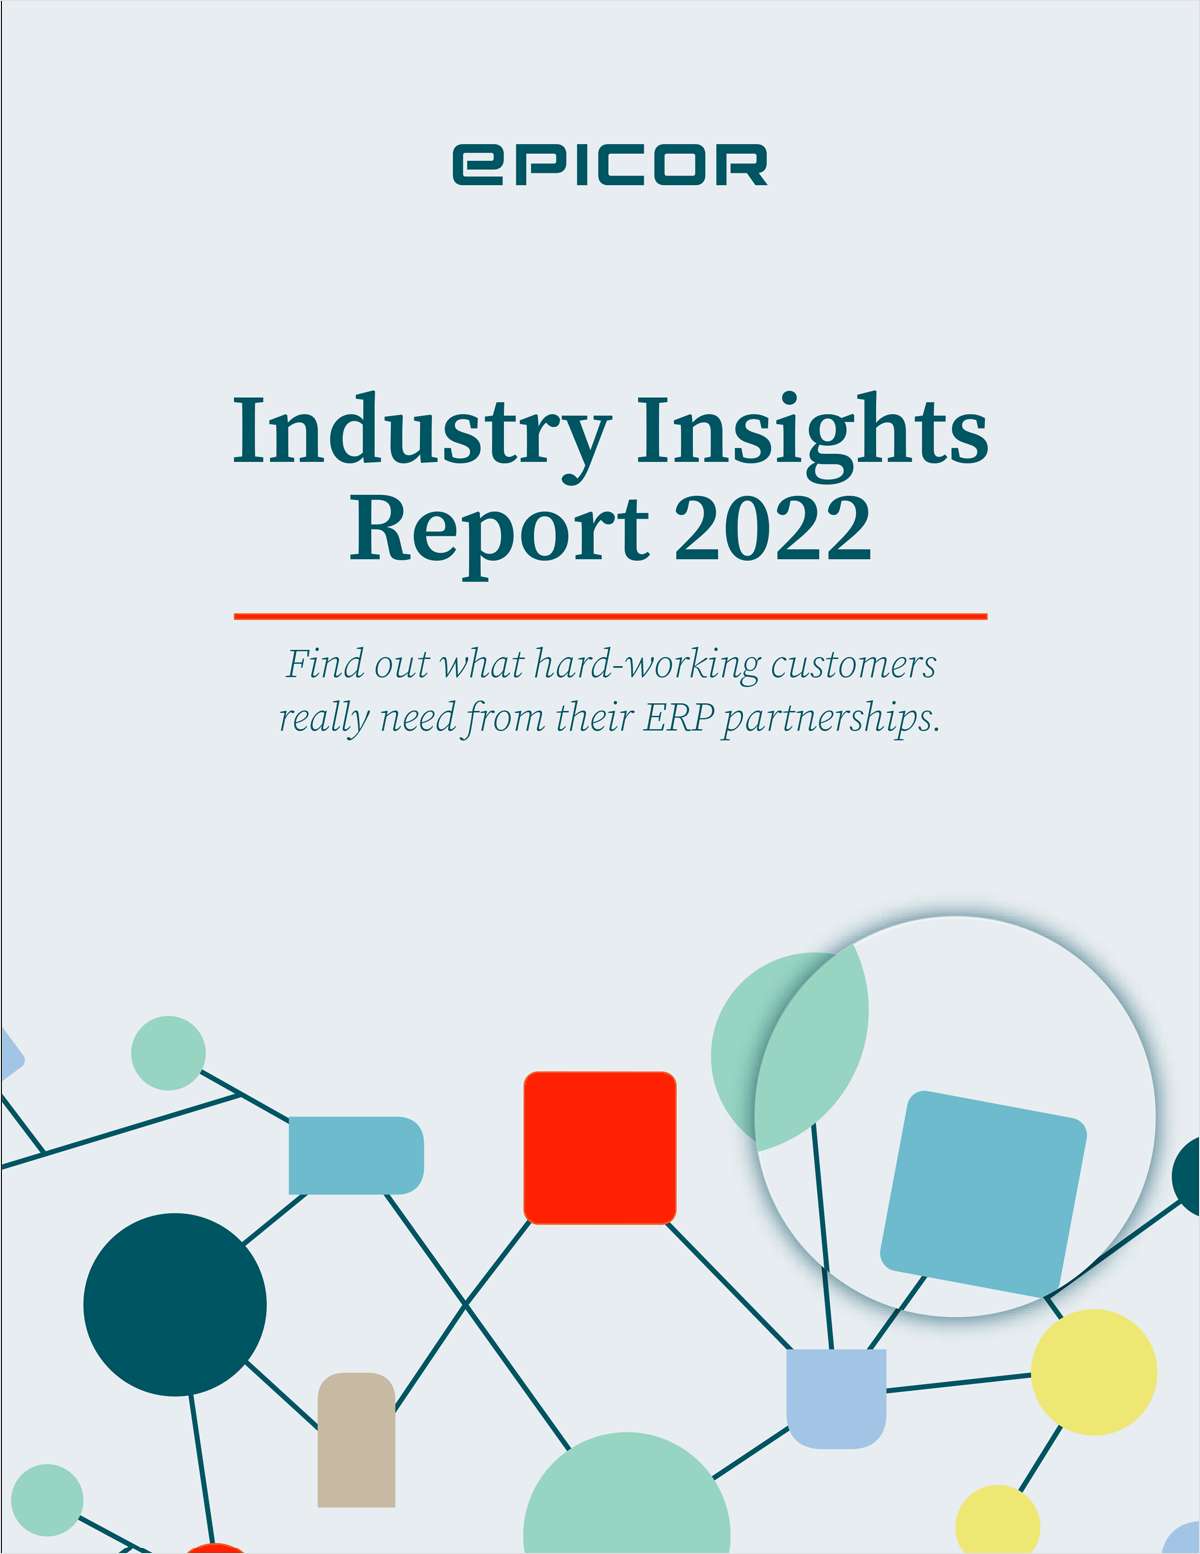 Industry Insights Report 2022 from Epicor